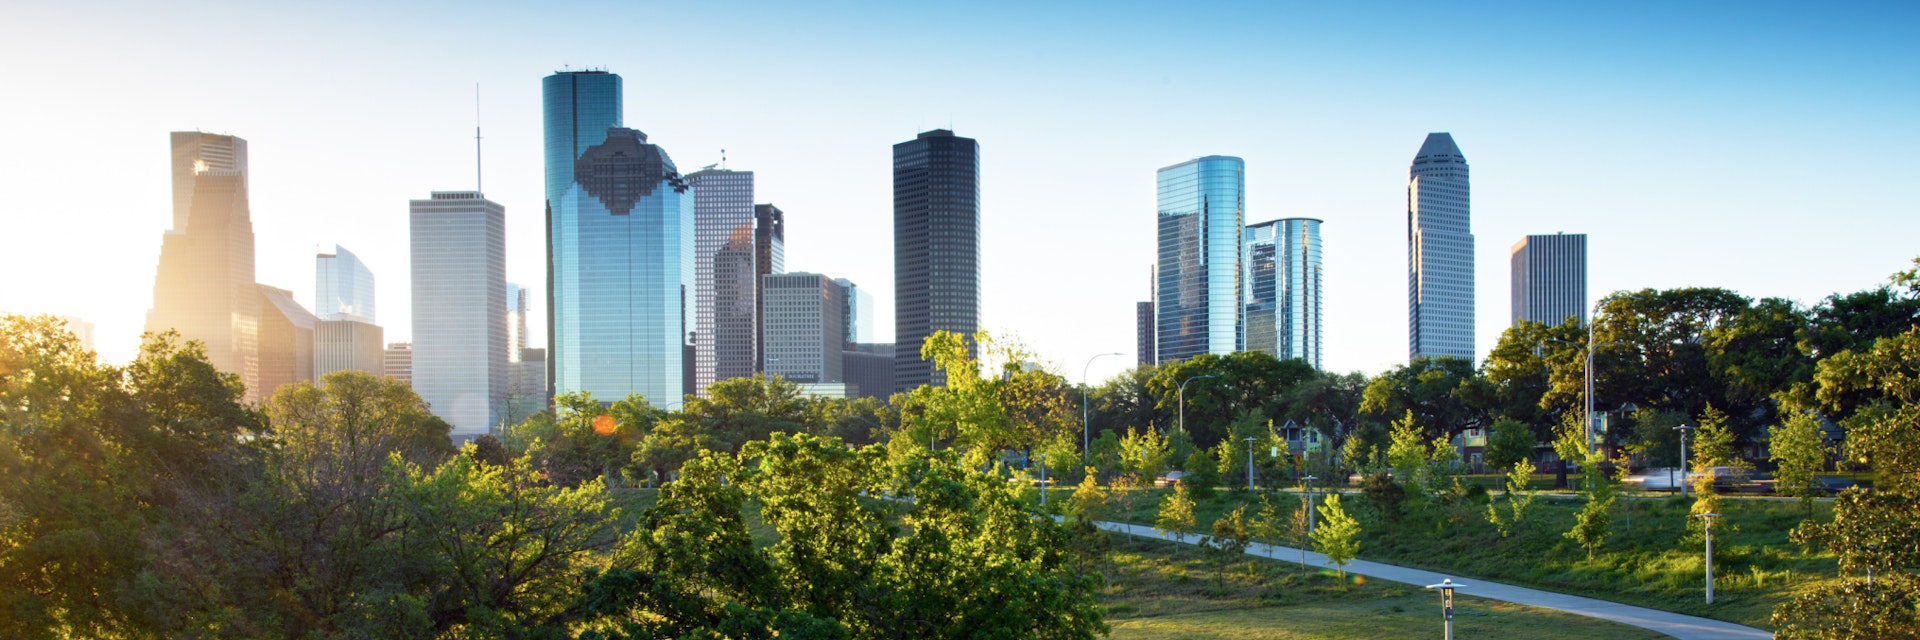 Urban Buffalo Bayou Park offers downtown Houston a green oasis for recreation and beautiful views of the skyline.